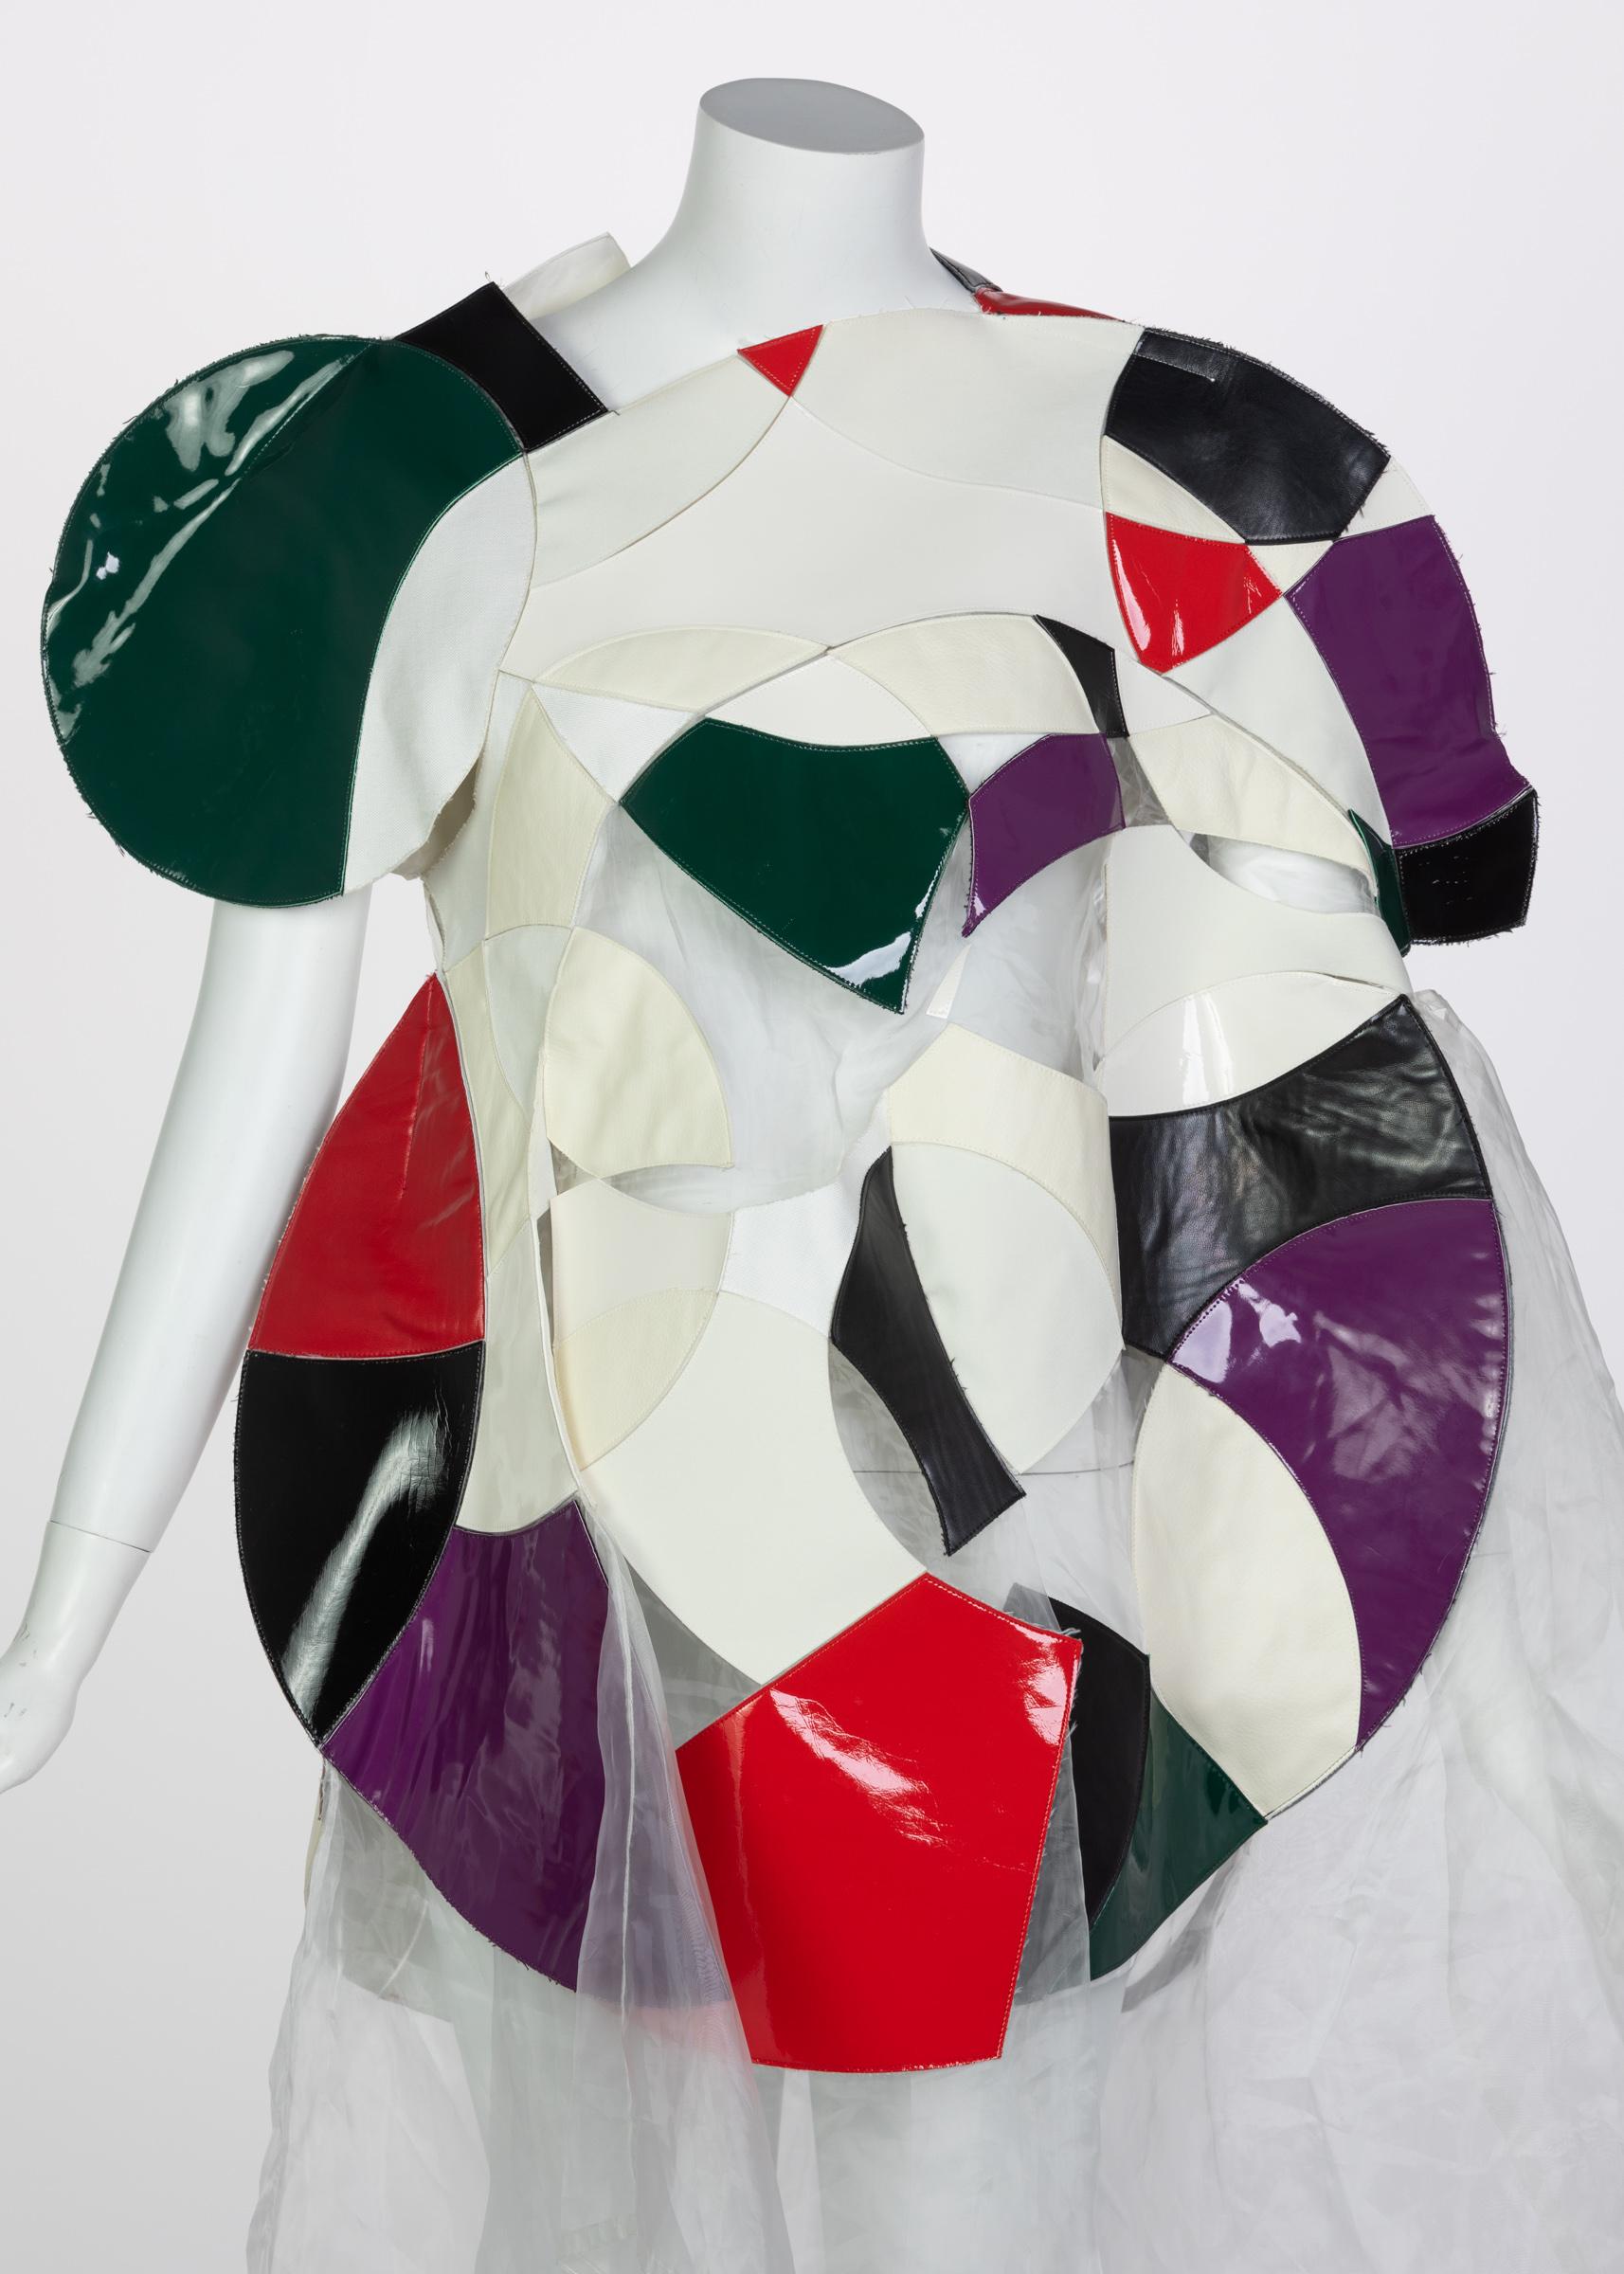 Junya Watanabe Comme des Garcons Orphic-Cubism Dress Runway, 2015 In Excellent Condition In Boca Raton, FL